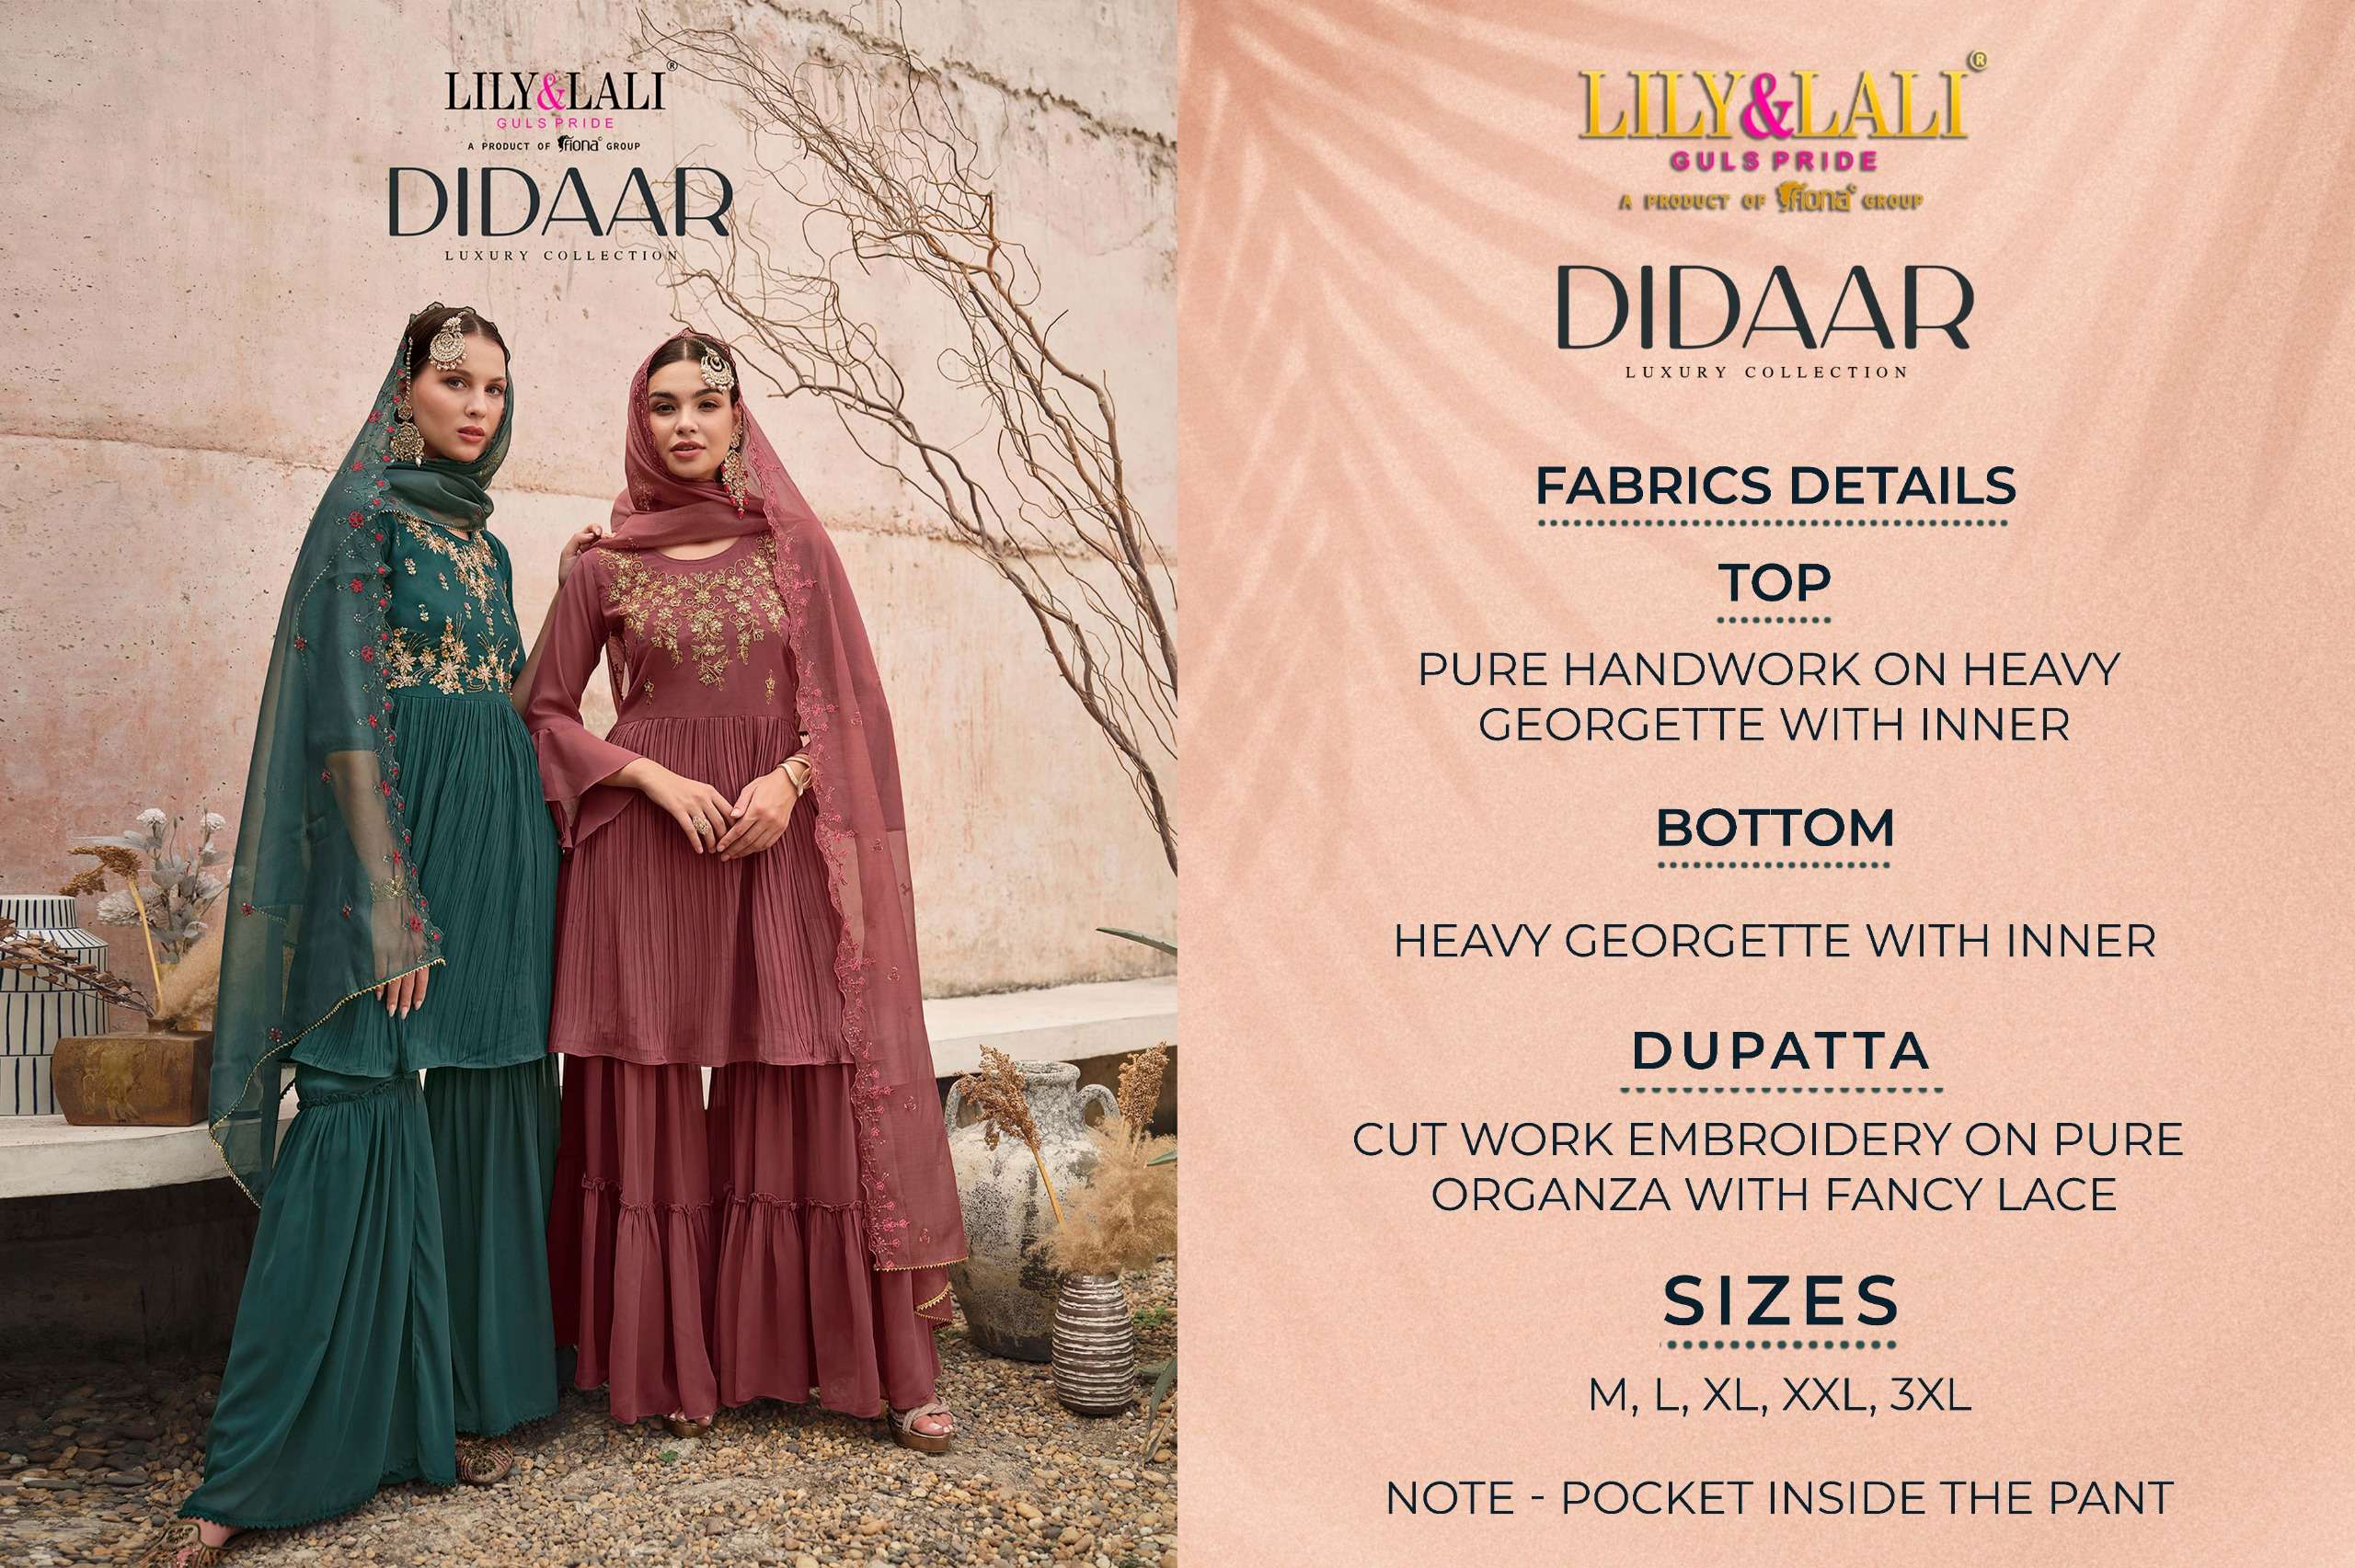 lily and lali didaar  georgette festive look top gharara with dupatta catalog